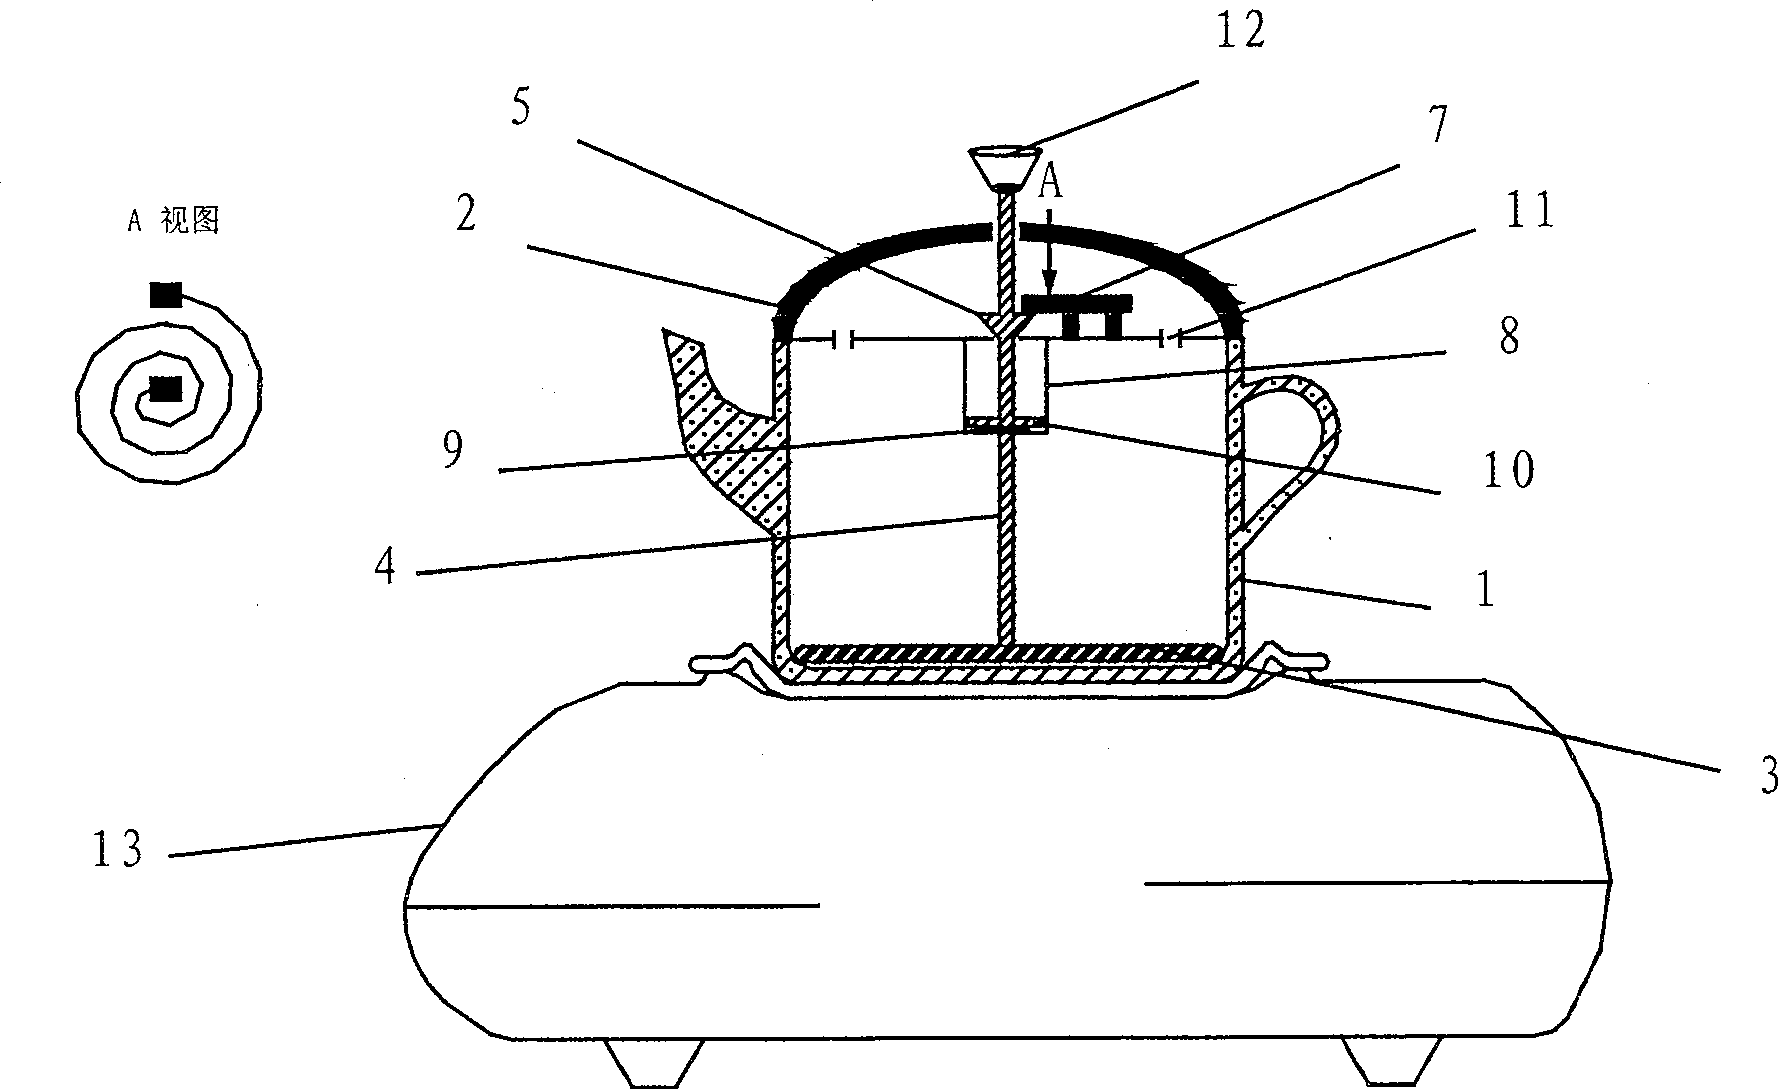 Metalloid cooker for electromagentic furnace